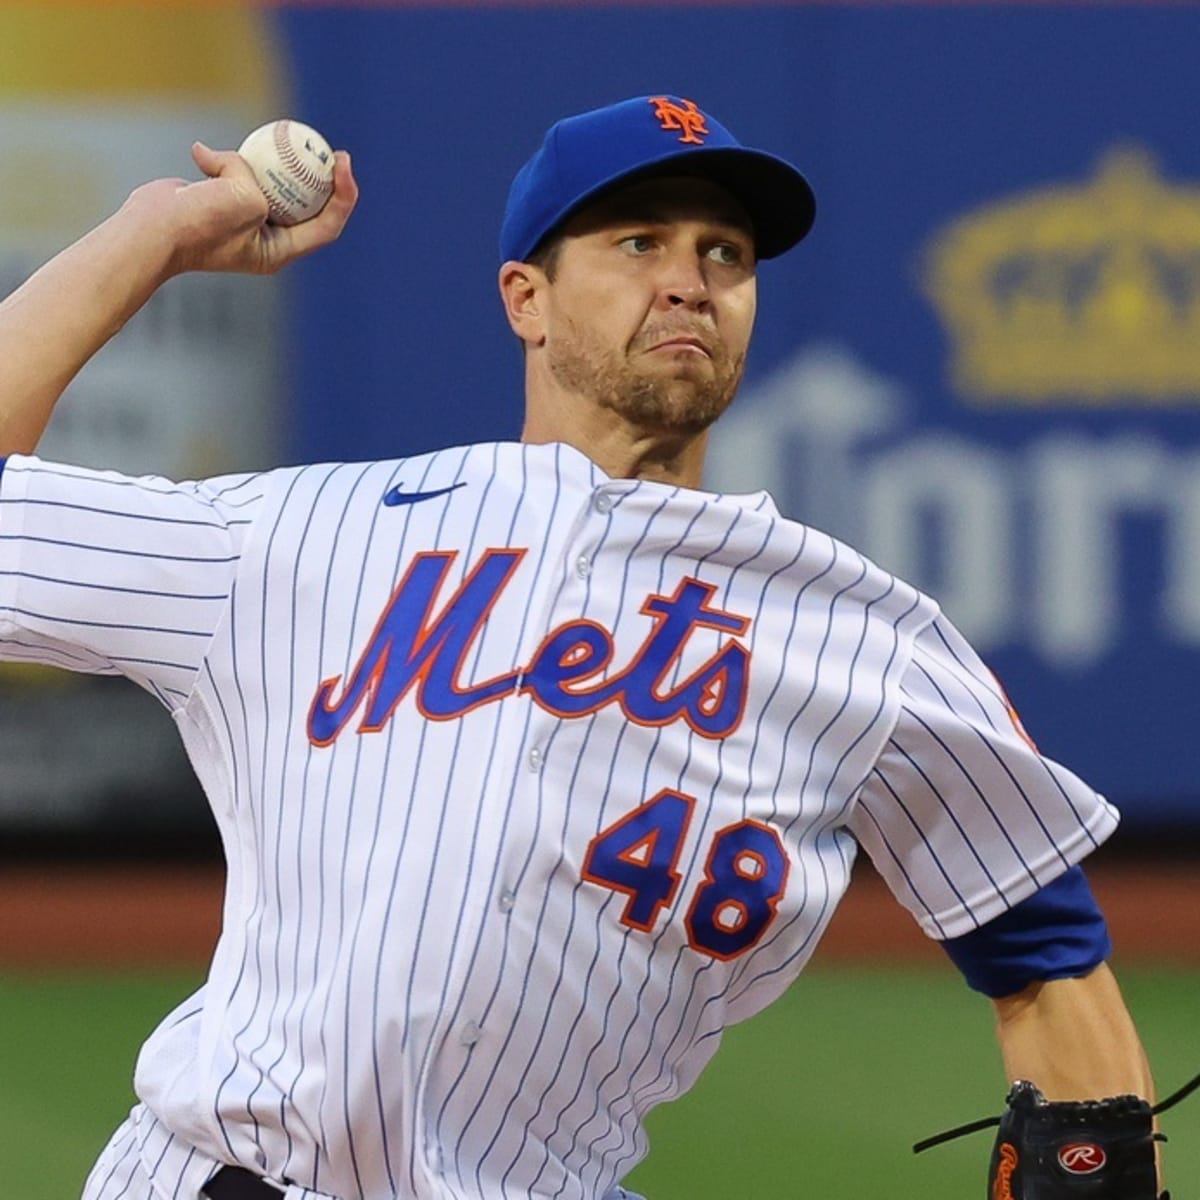 Jacob deGrom's Patience Has Handsomely Paid Off With A $137.5 Million  Contract Extension